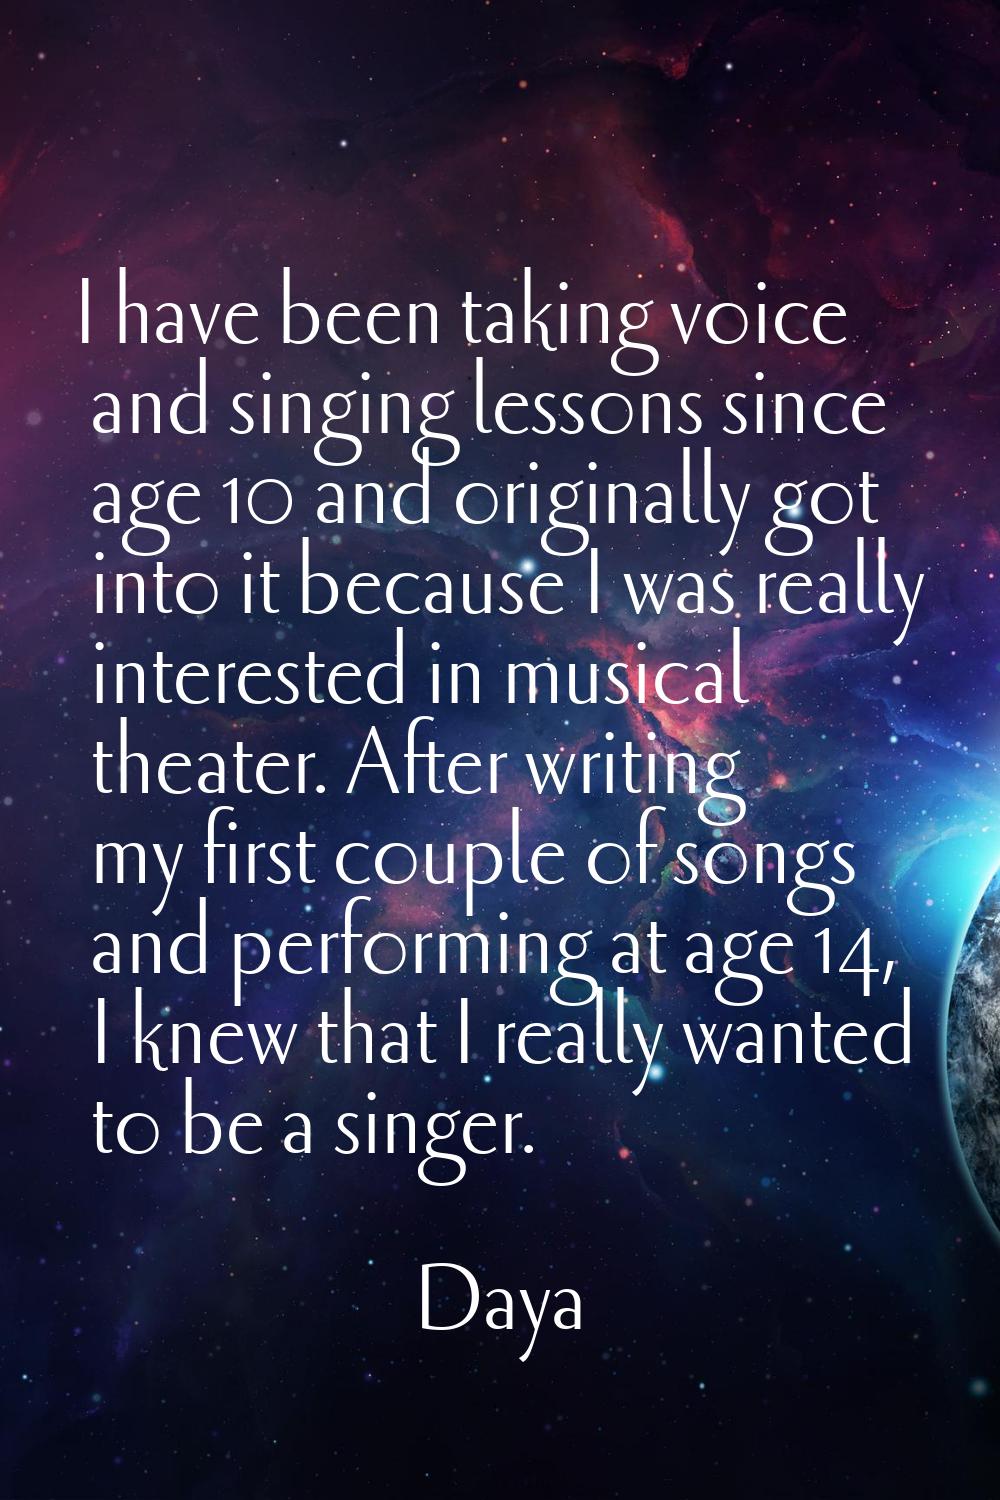 I have been taking voice and singing lessons since age 10 and originally got into it because I was 